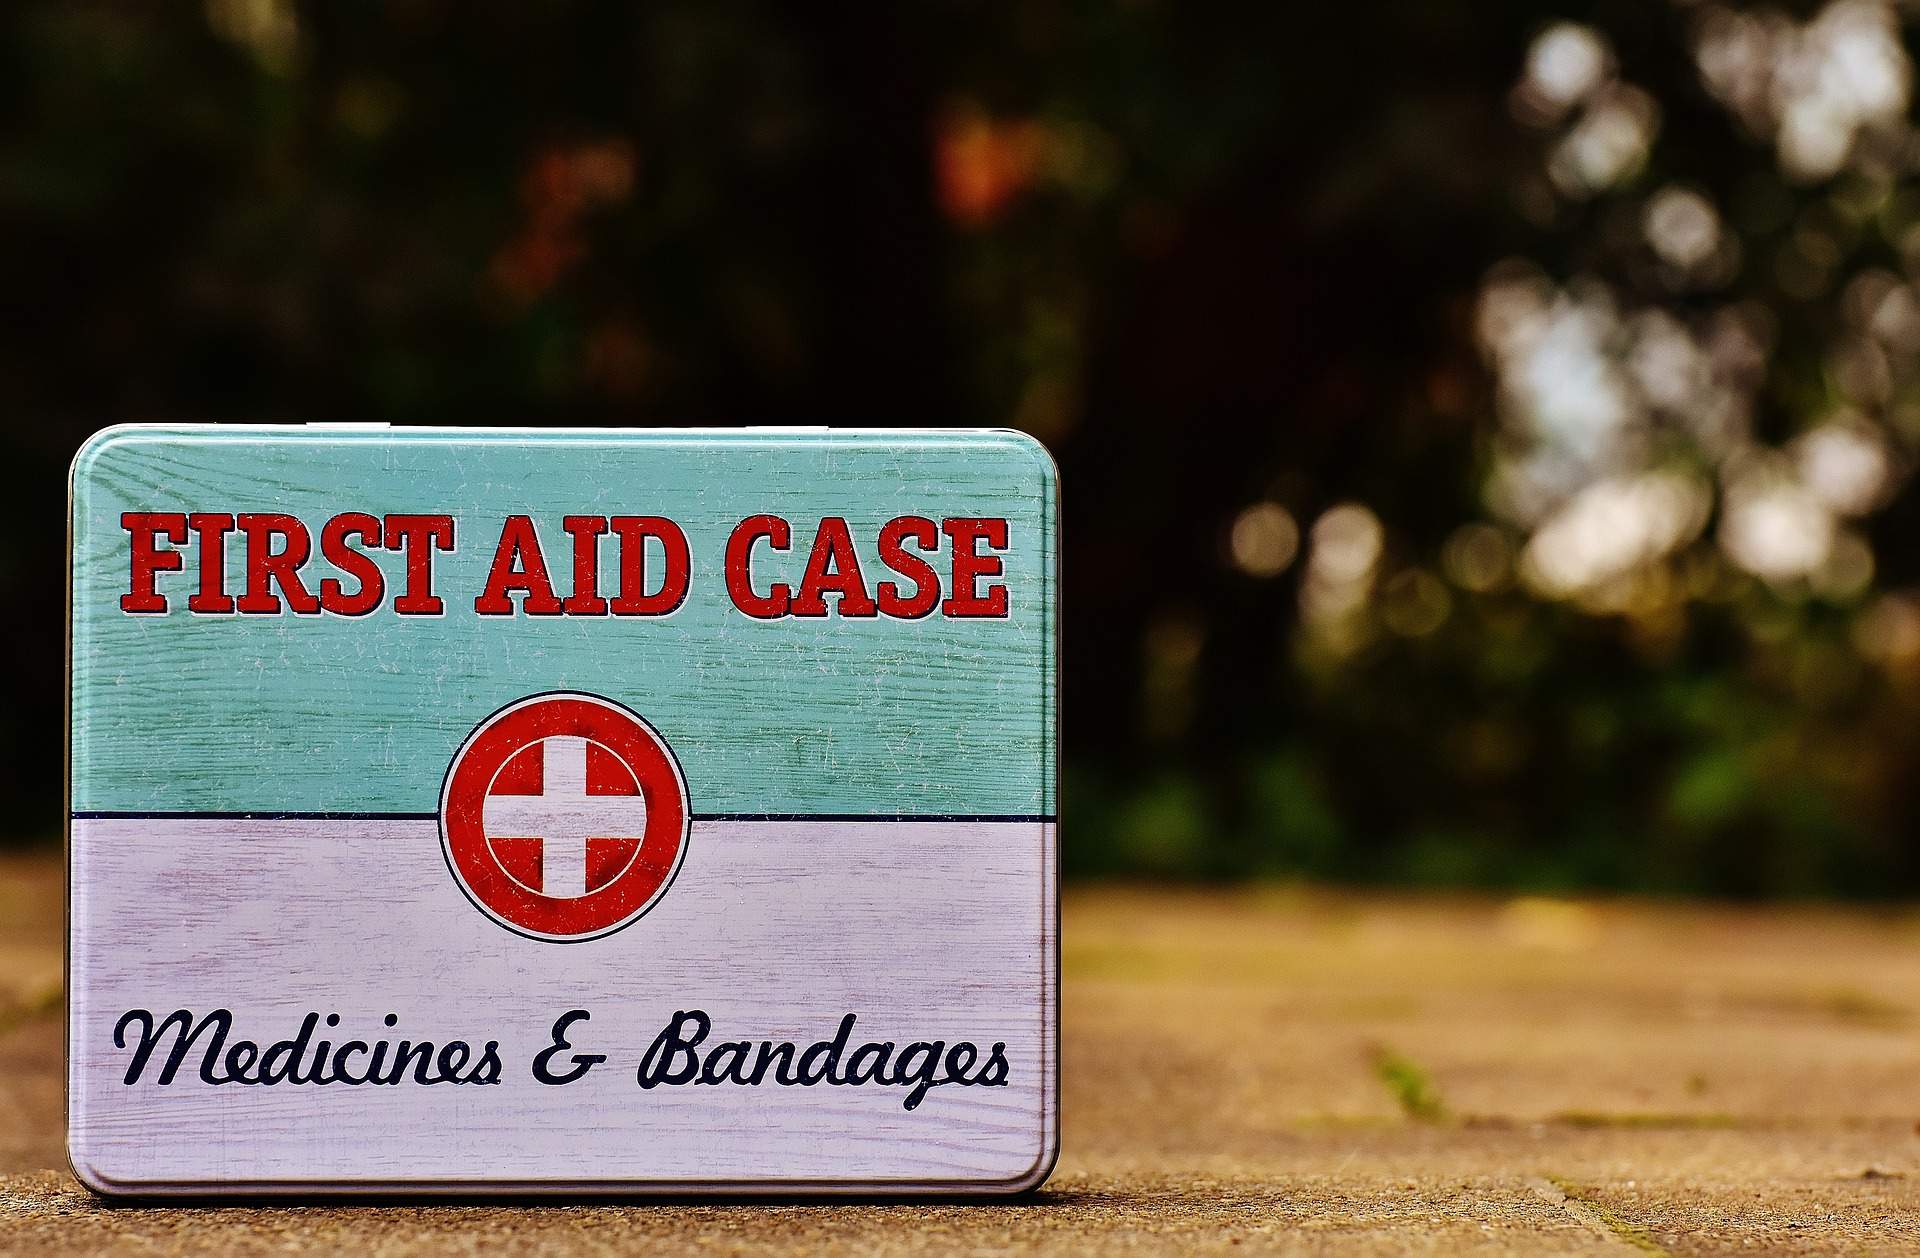 off-road safety; a first aid kit